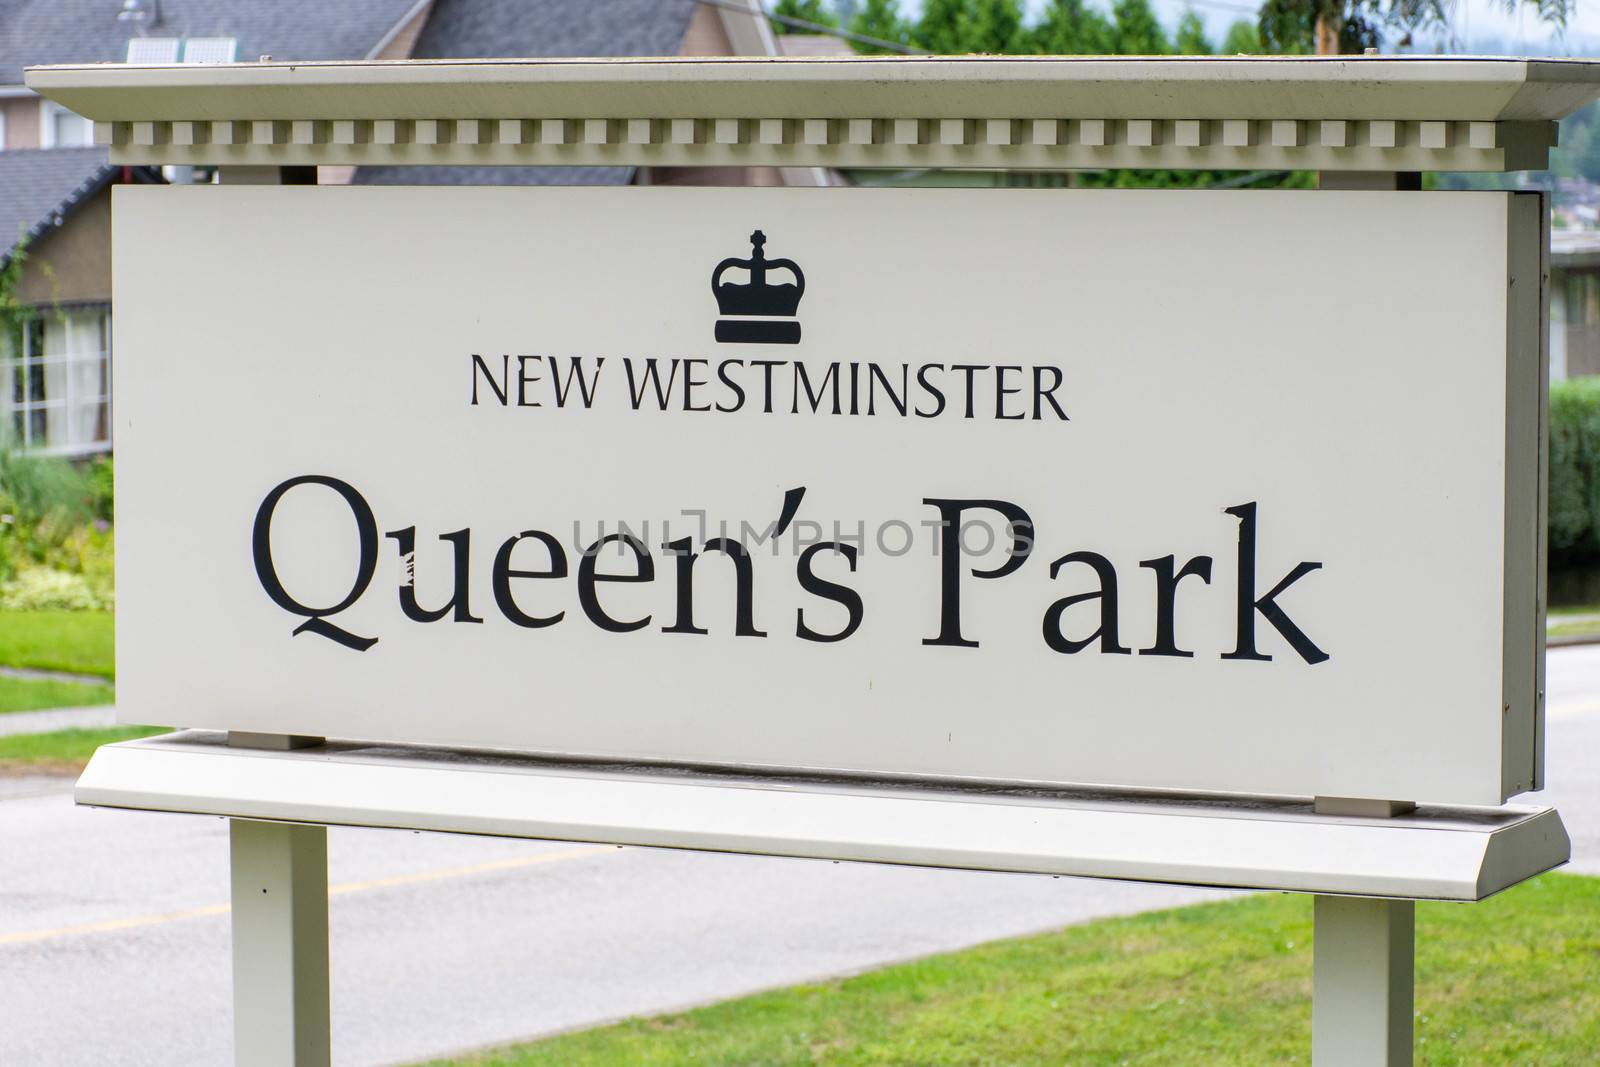 Queen's Park entrance sign in New Westminster, British Columbia, Canada.